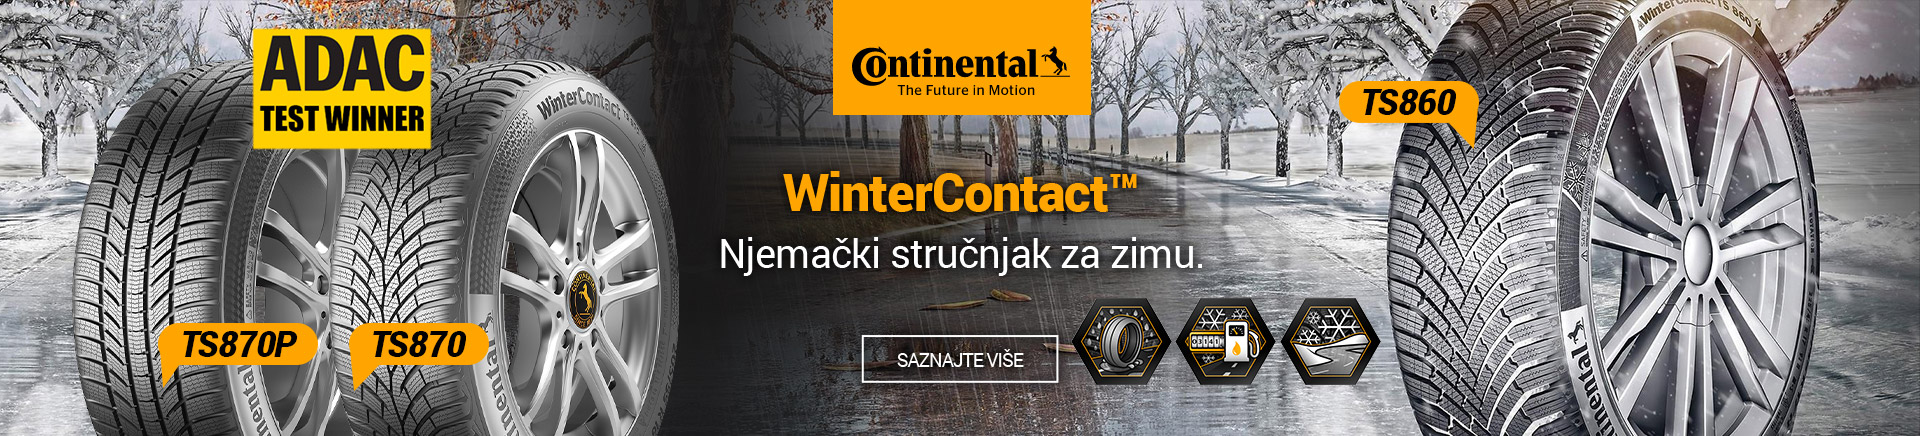 HR Continental Gume WinterContact TS 2022 MOBILE 380 X 436.jpg